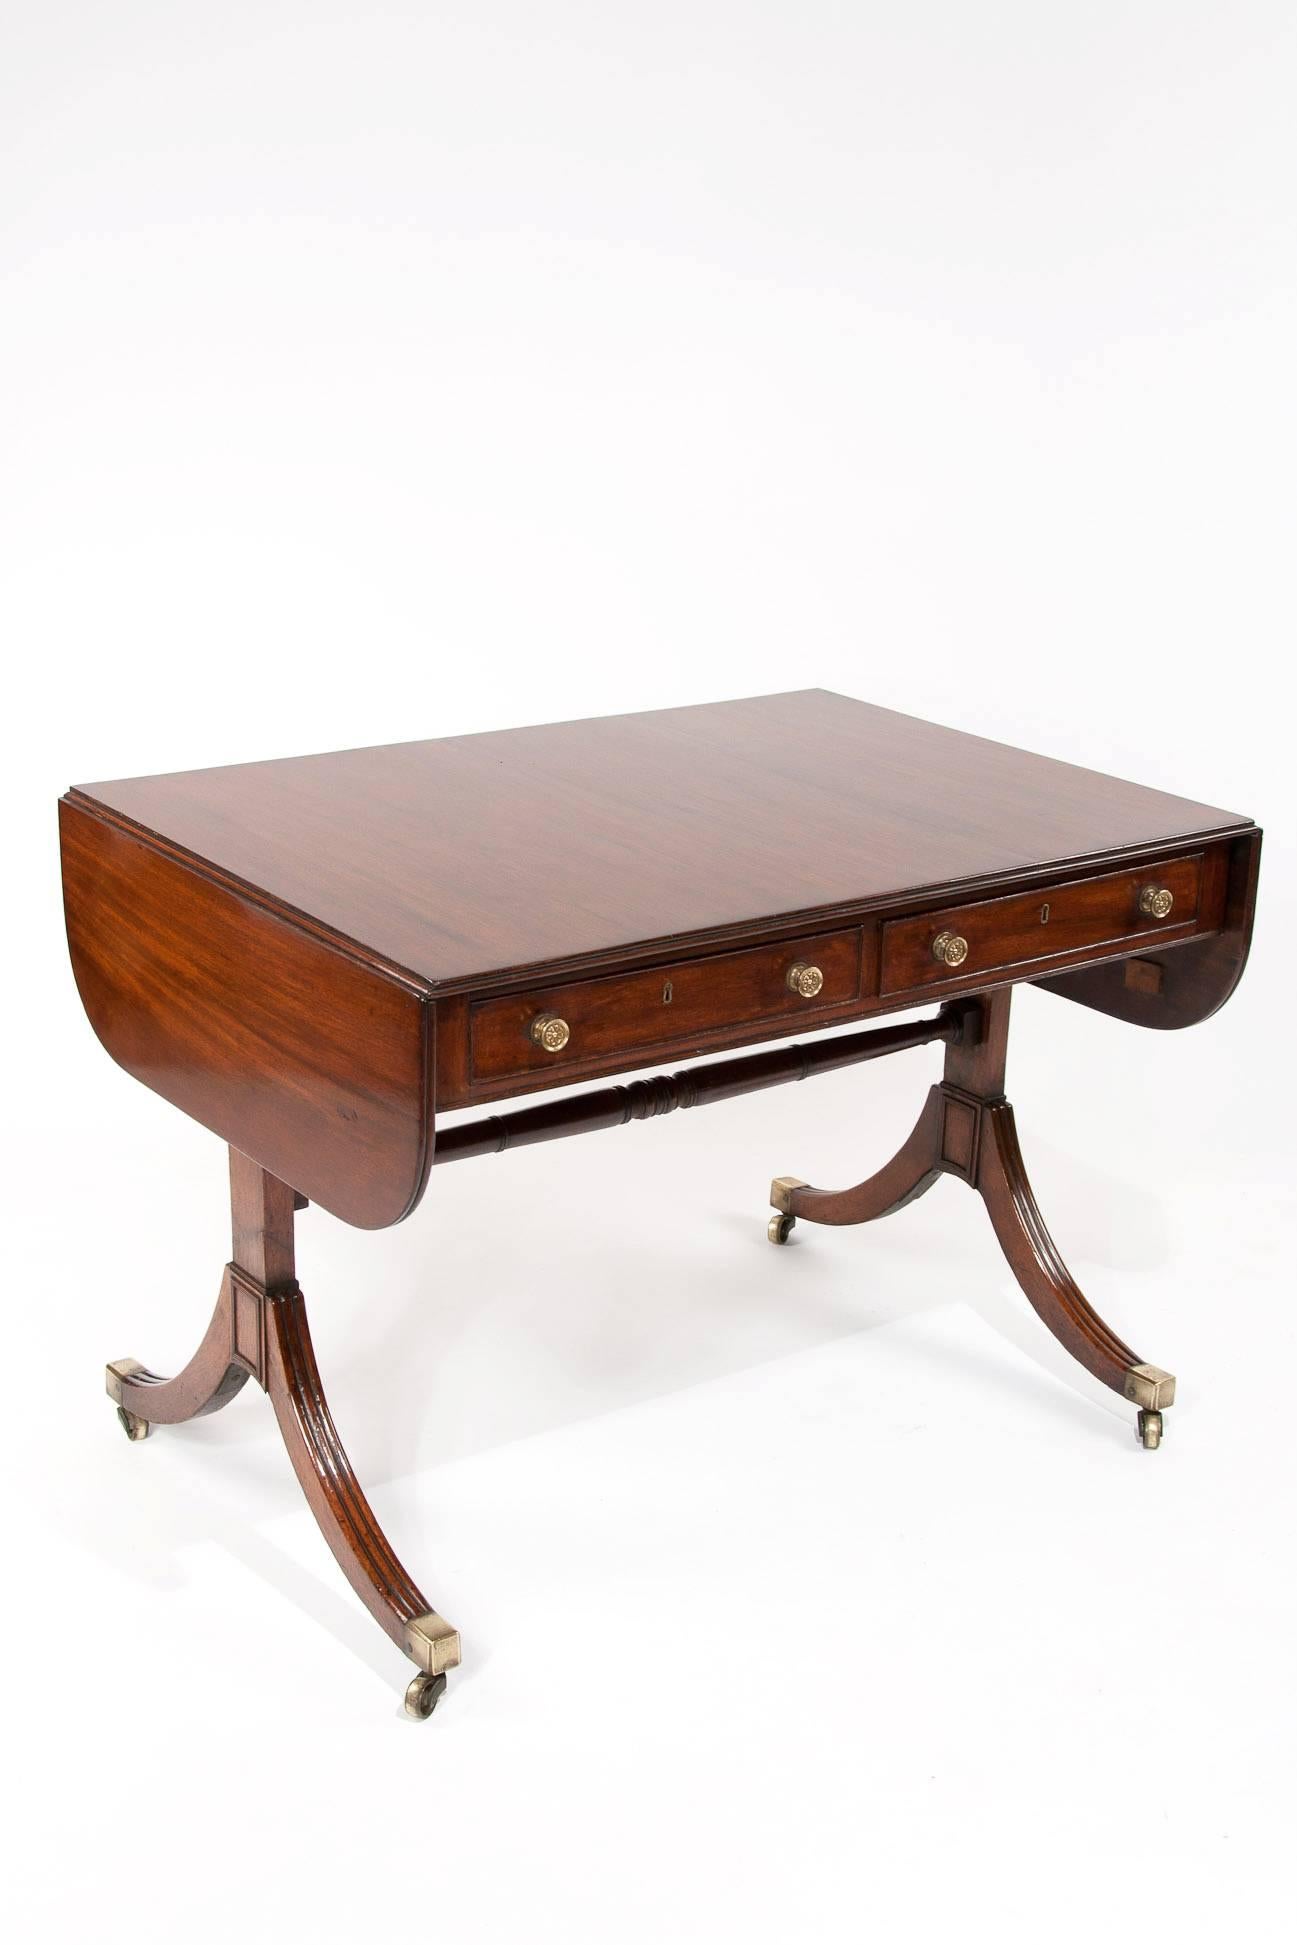 A very elegant Regency mahogany two drawers sofa table. Of very Fine proportions this quality mahogany sofa table has a solid rectangular top with a reeded edge and two drop flaps which extend to make the table length 58 inches / 147.5cm overall,